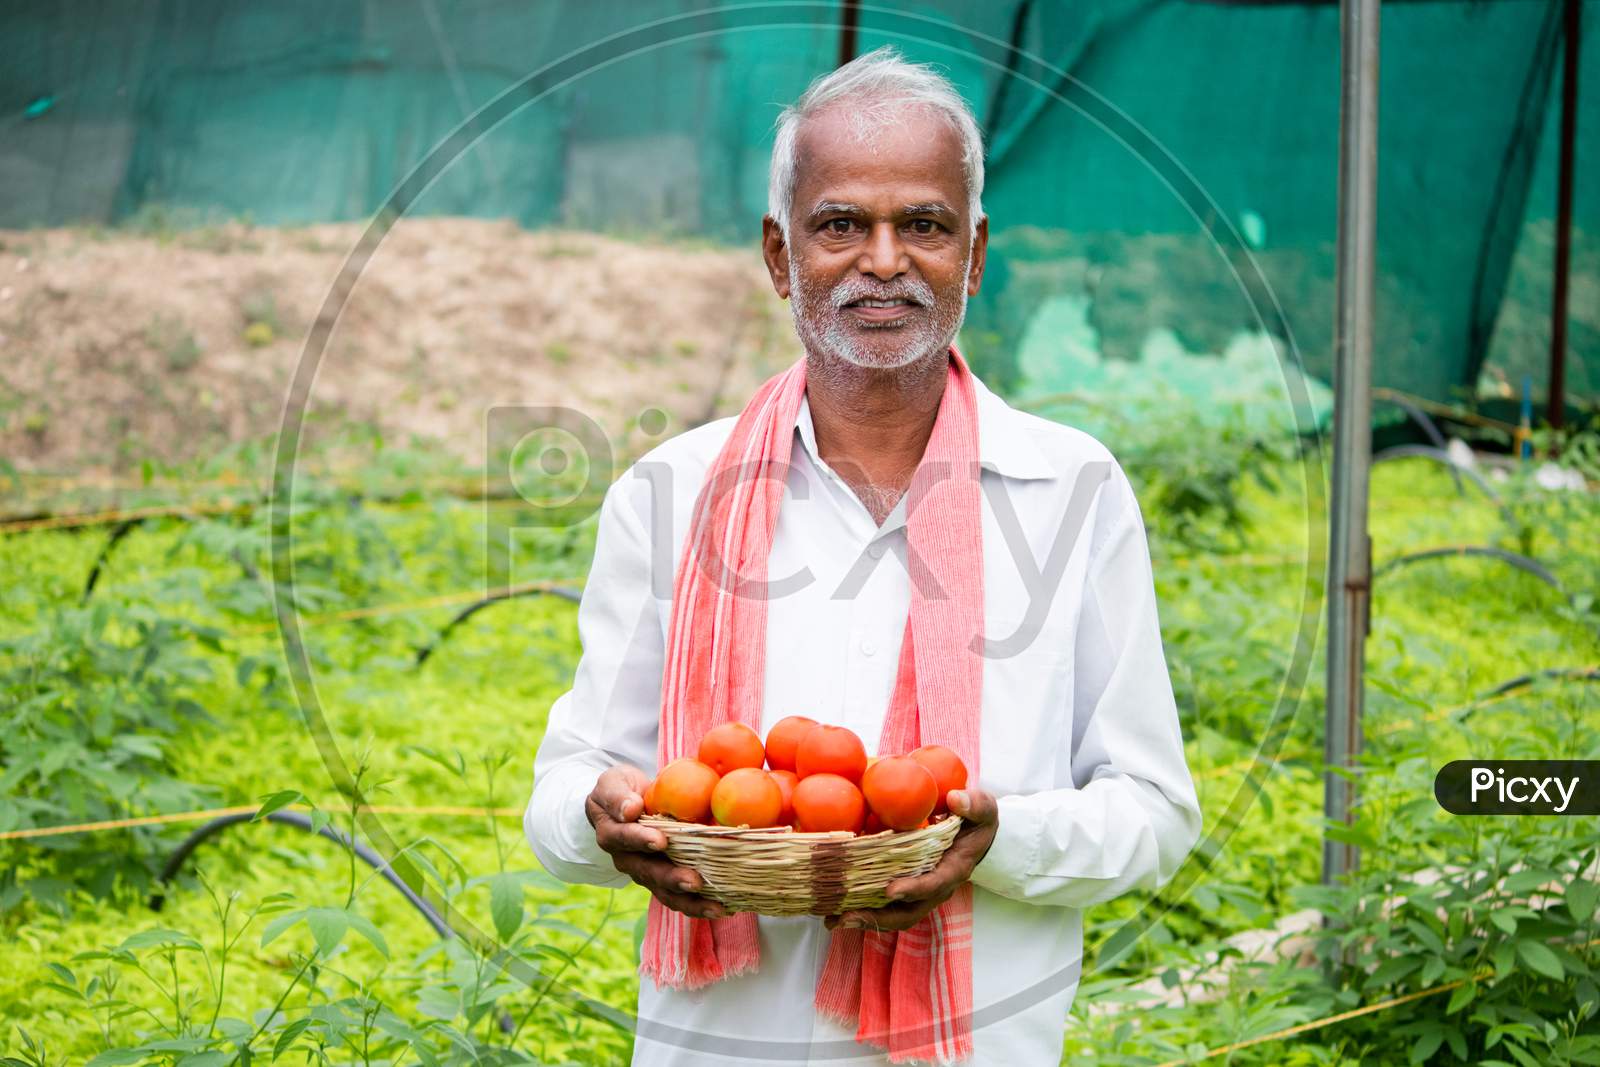 Happy Inidan Farmer Holding Fresh Farm Produce Tomatoes At Greenhouse Or Polyhouse And Looking At Camera - Cocept Of Good Crop Growth And Profit In Agribusiness